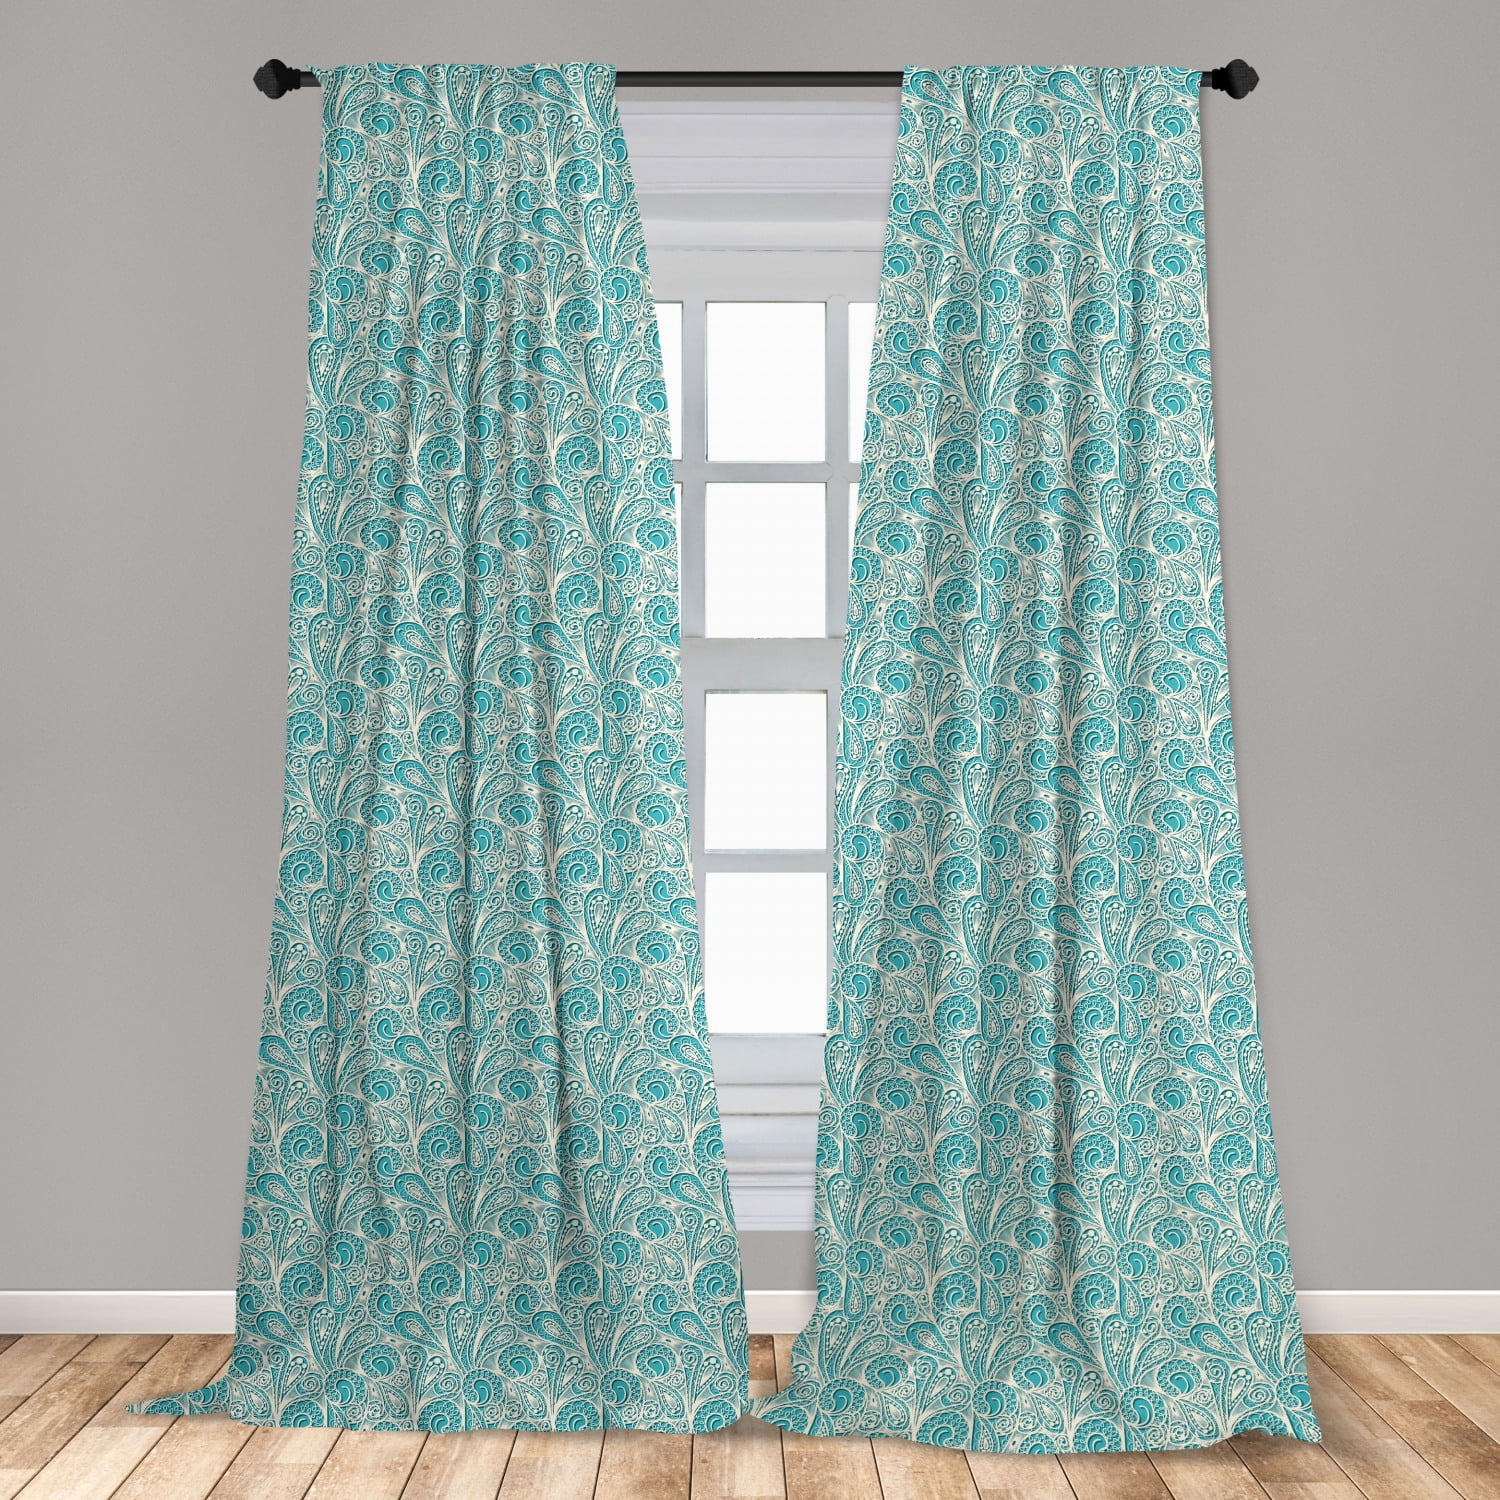 Teal Curtains 2 Panels Set Classical, Teal 2 Panel Curtains